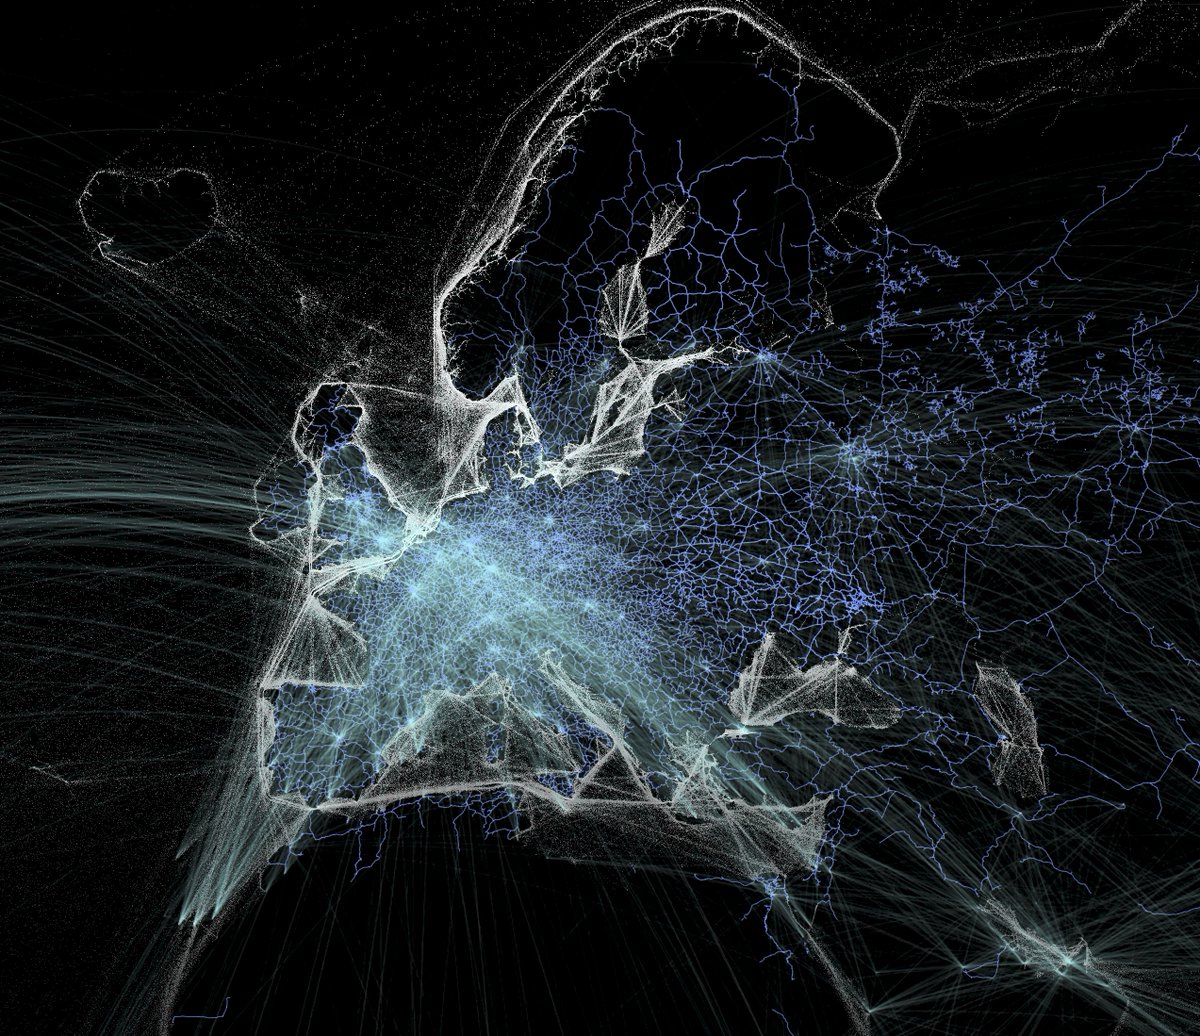 #Europe. No boundaries, just flows: trains, planes and ships.
Borders are political.

#GIS #urbananalytics #spatialdata #dataviz #mapping